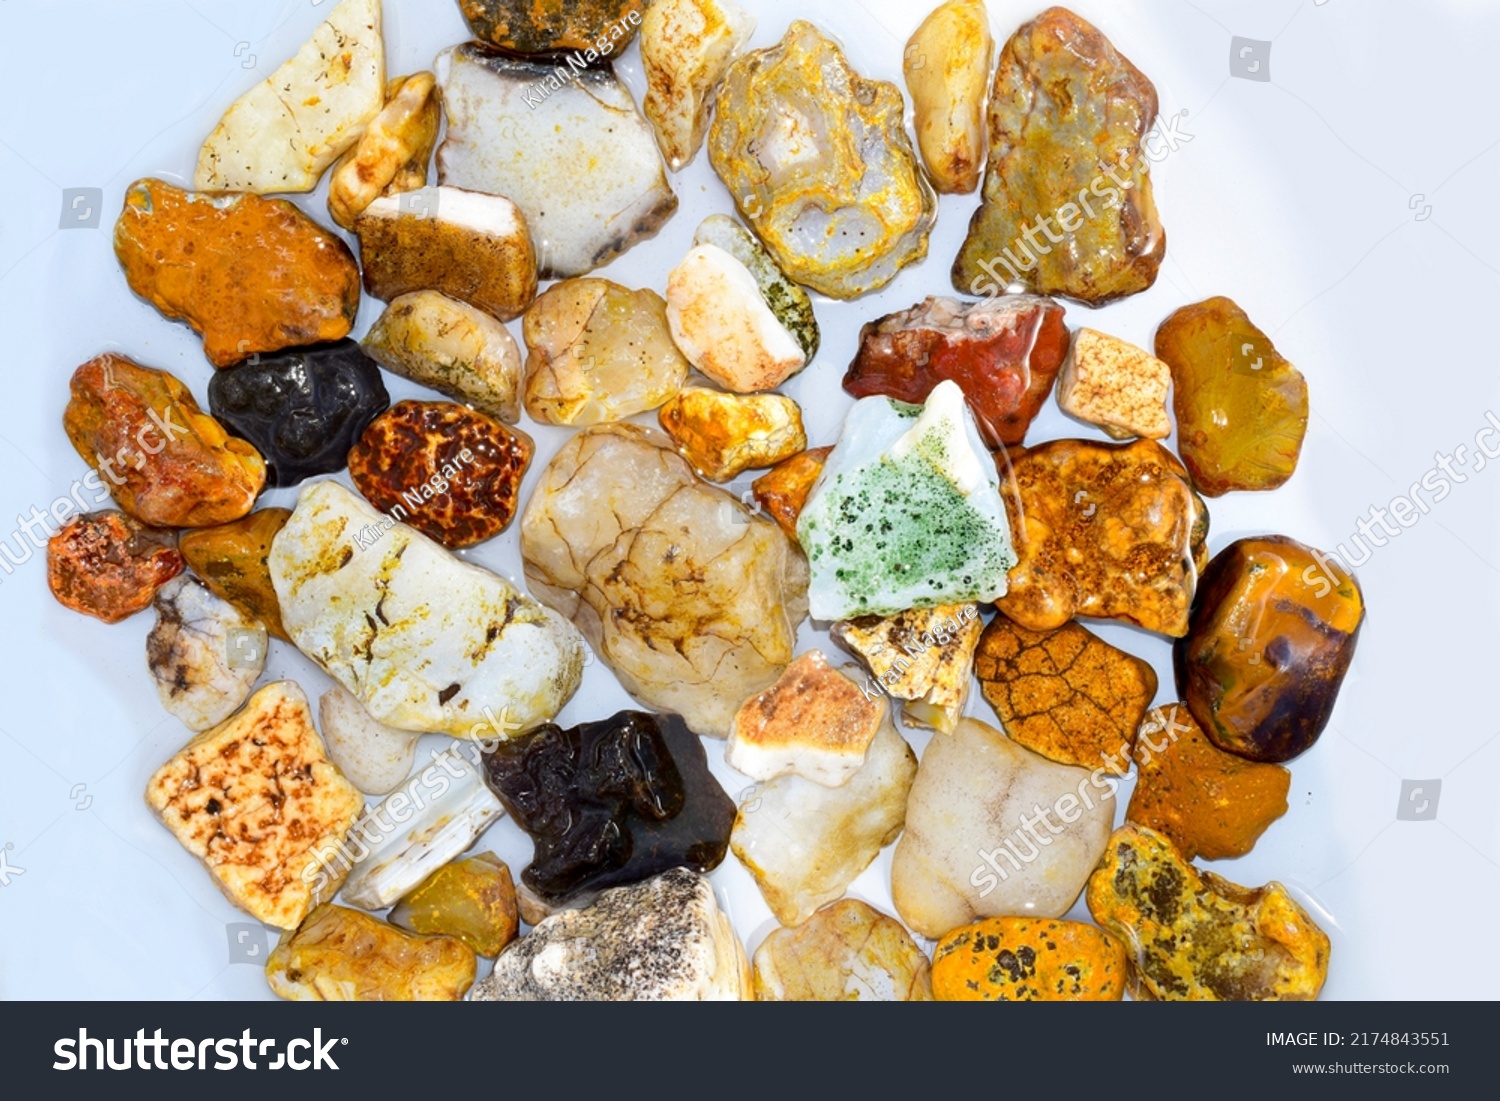 Colorful collection of small river stones on white background, River stones background. #2174843551